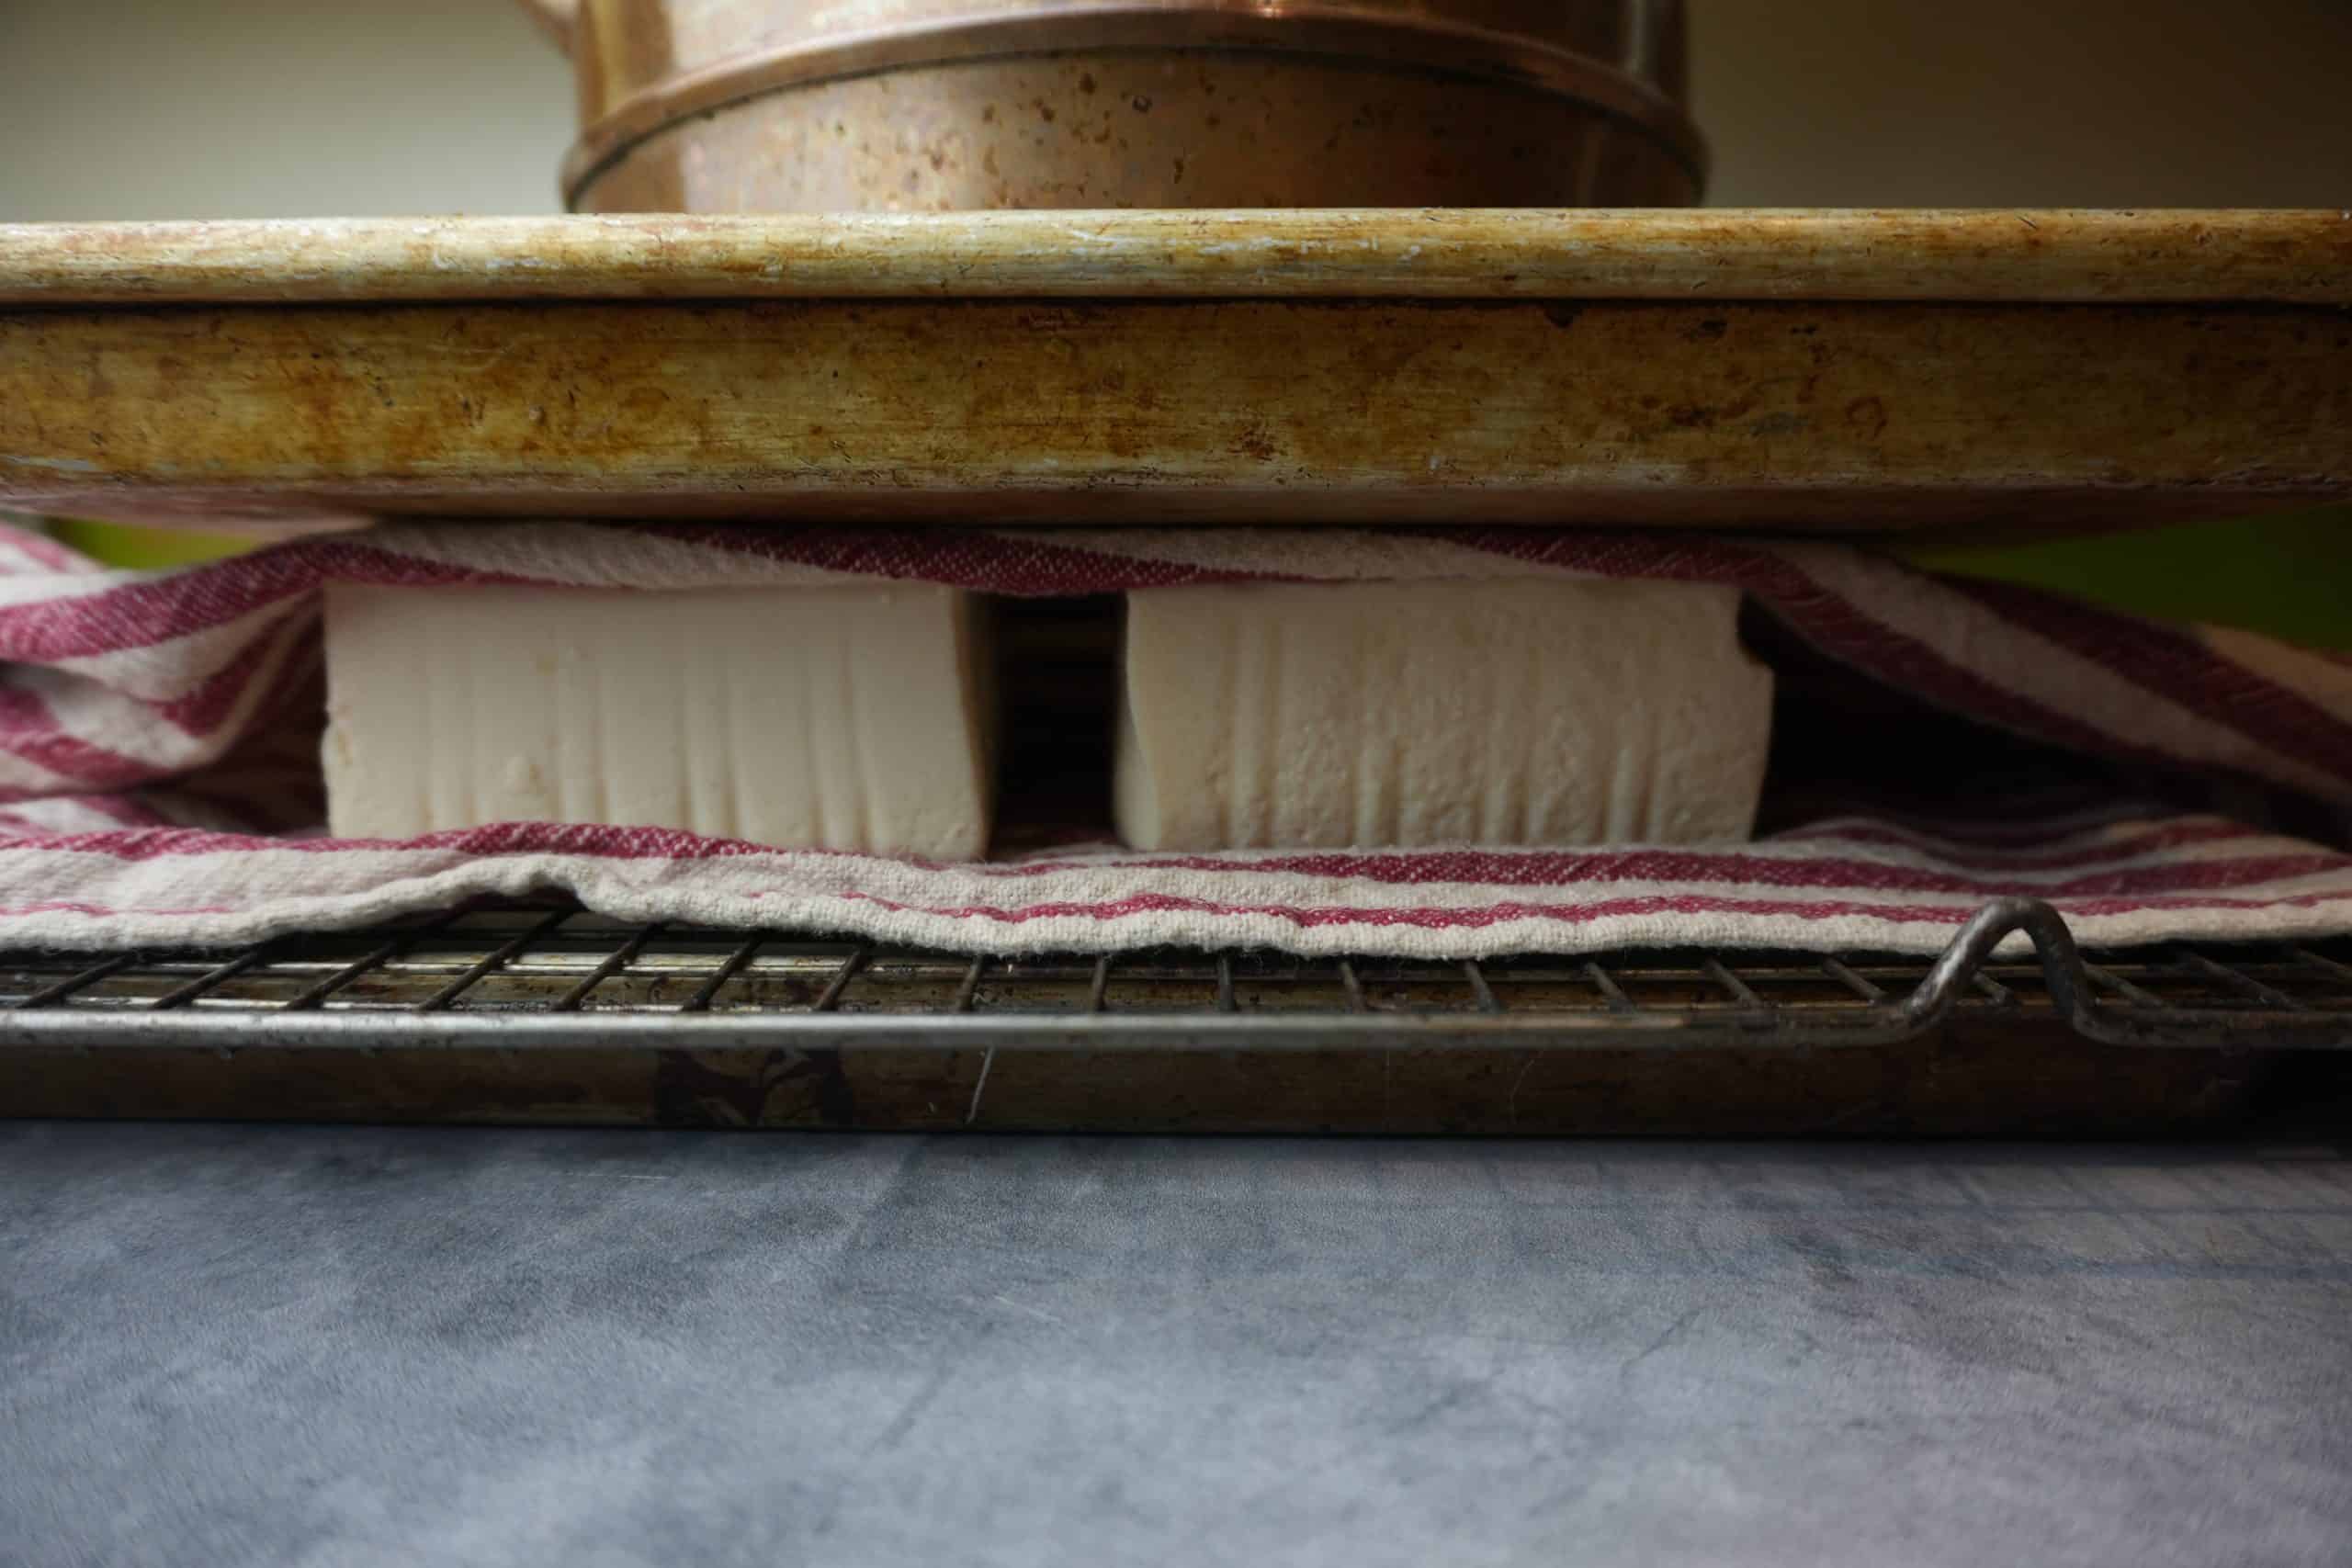 Soft tofu being pressed. it is wrapped in a towel on a cooling rack with a heavy pan on top of it.